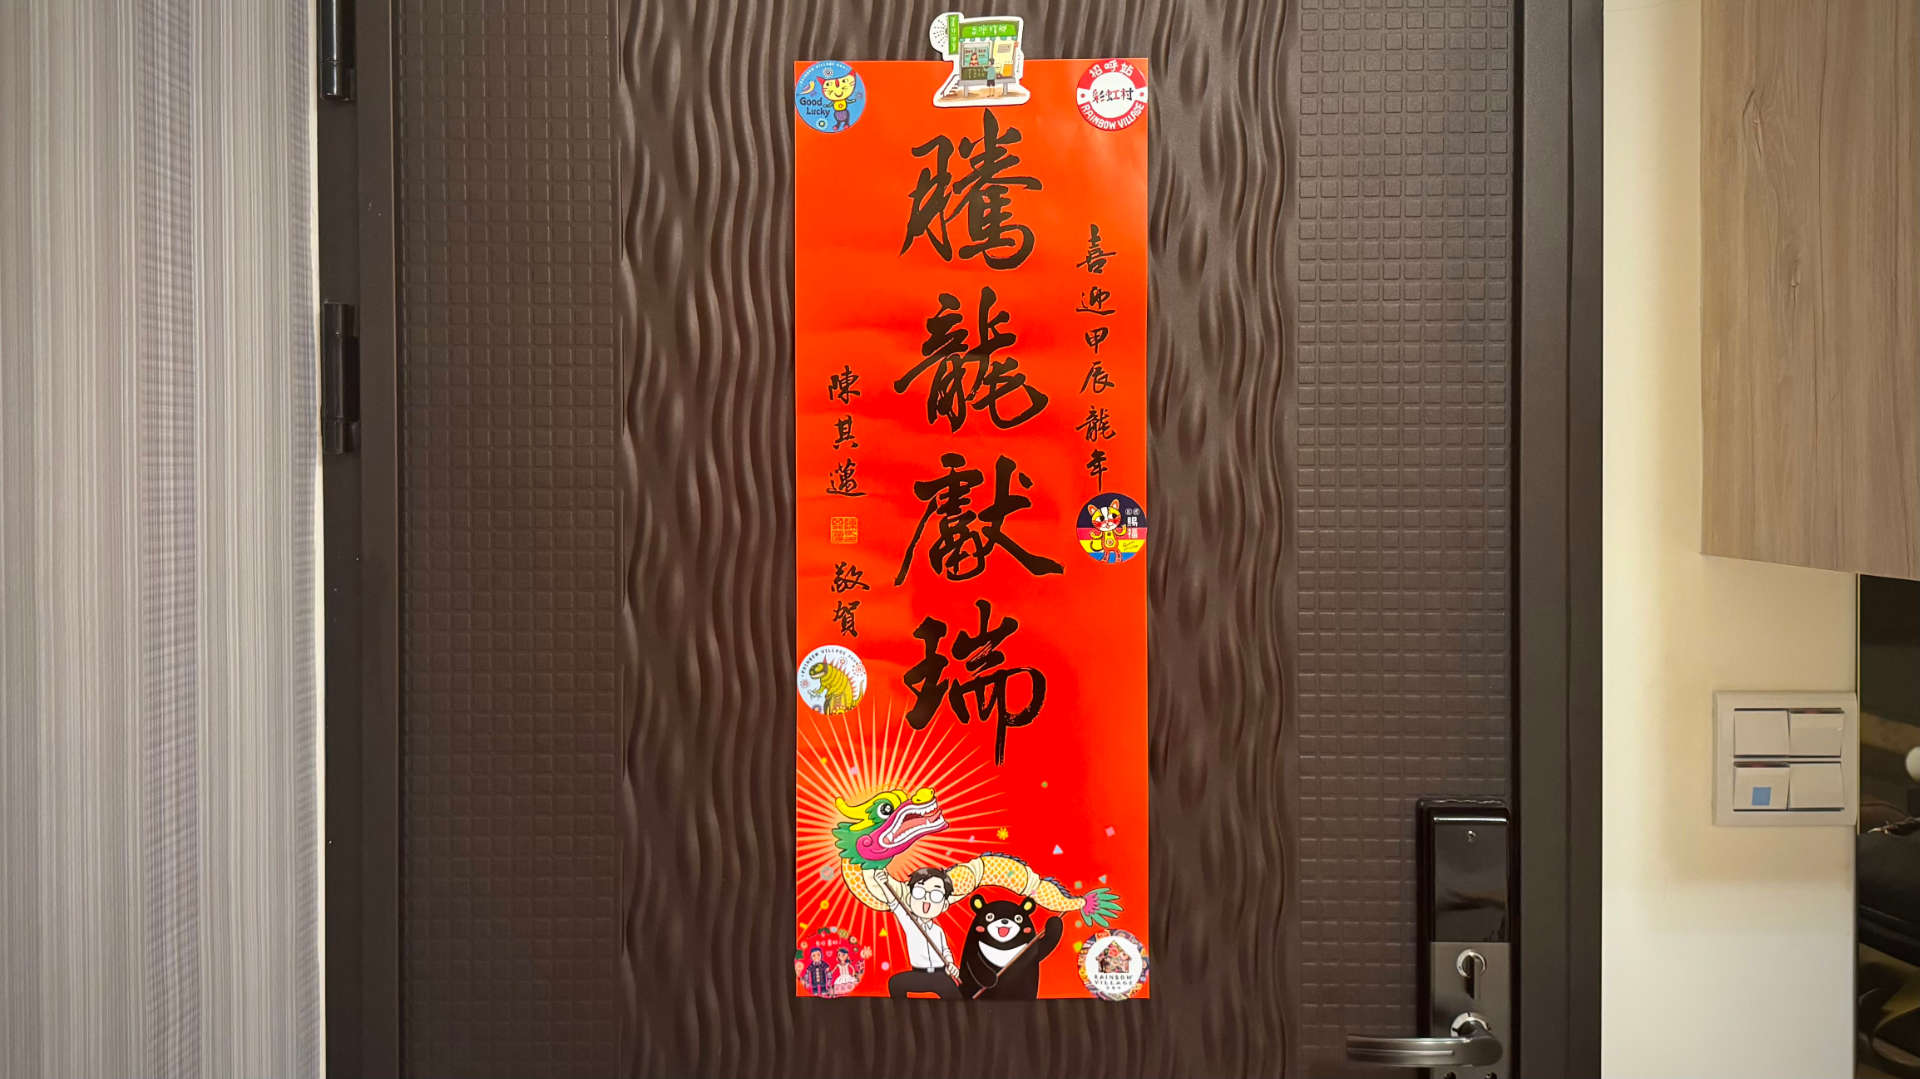 A tall, narrow, piece of paper affixed to a metal door with magnets. The paper includes many Chinese characters, written vertically, plus a cartoon mayor and Formosan black bear.